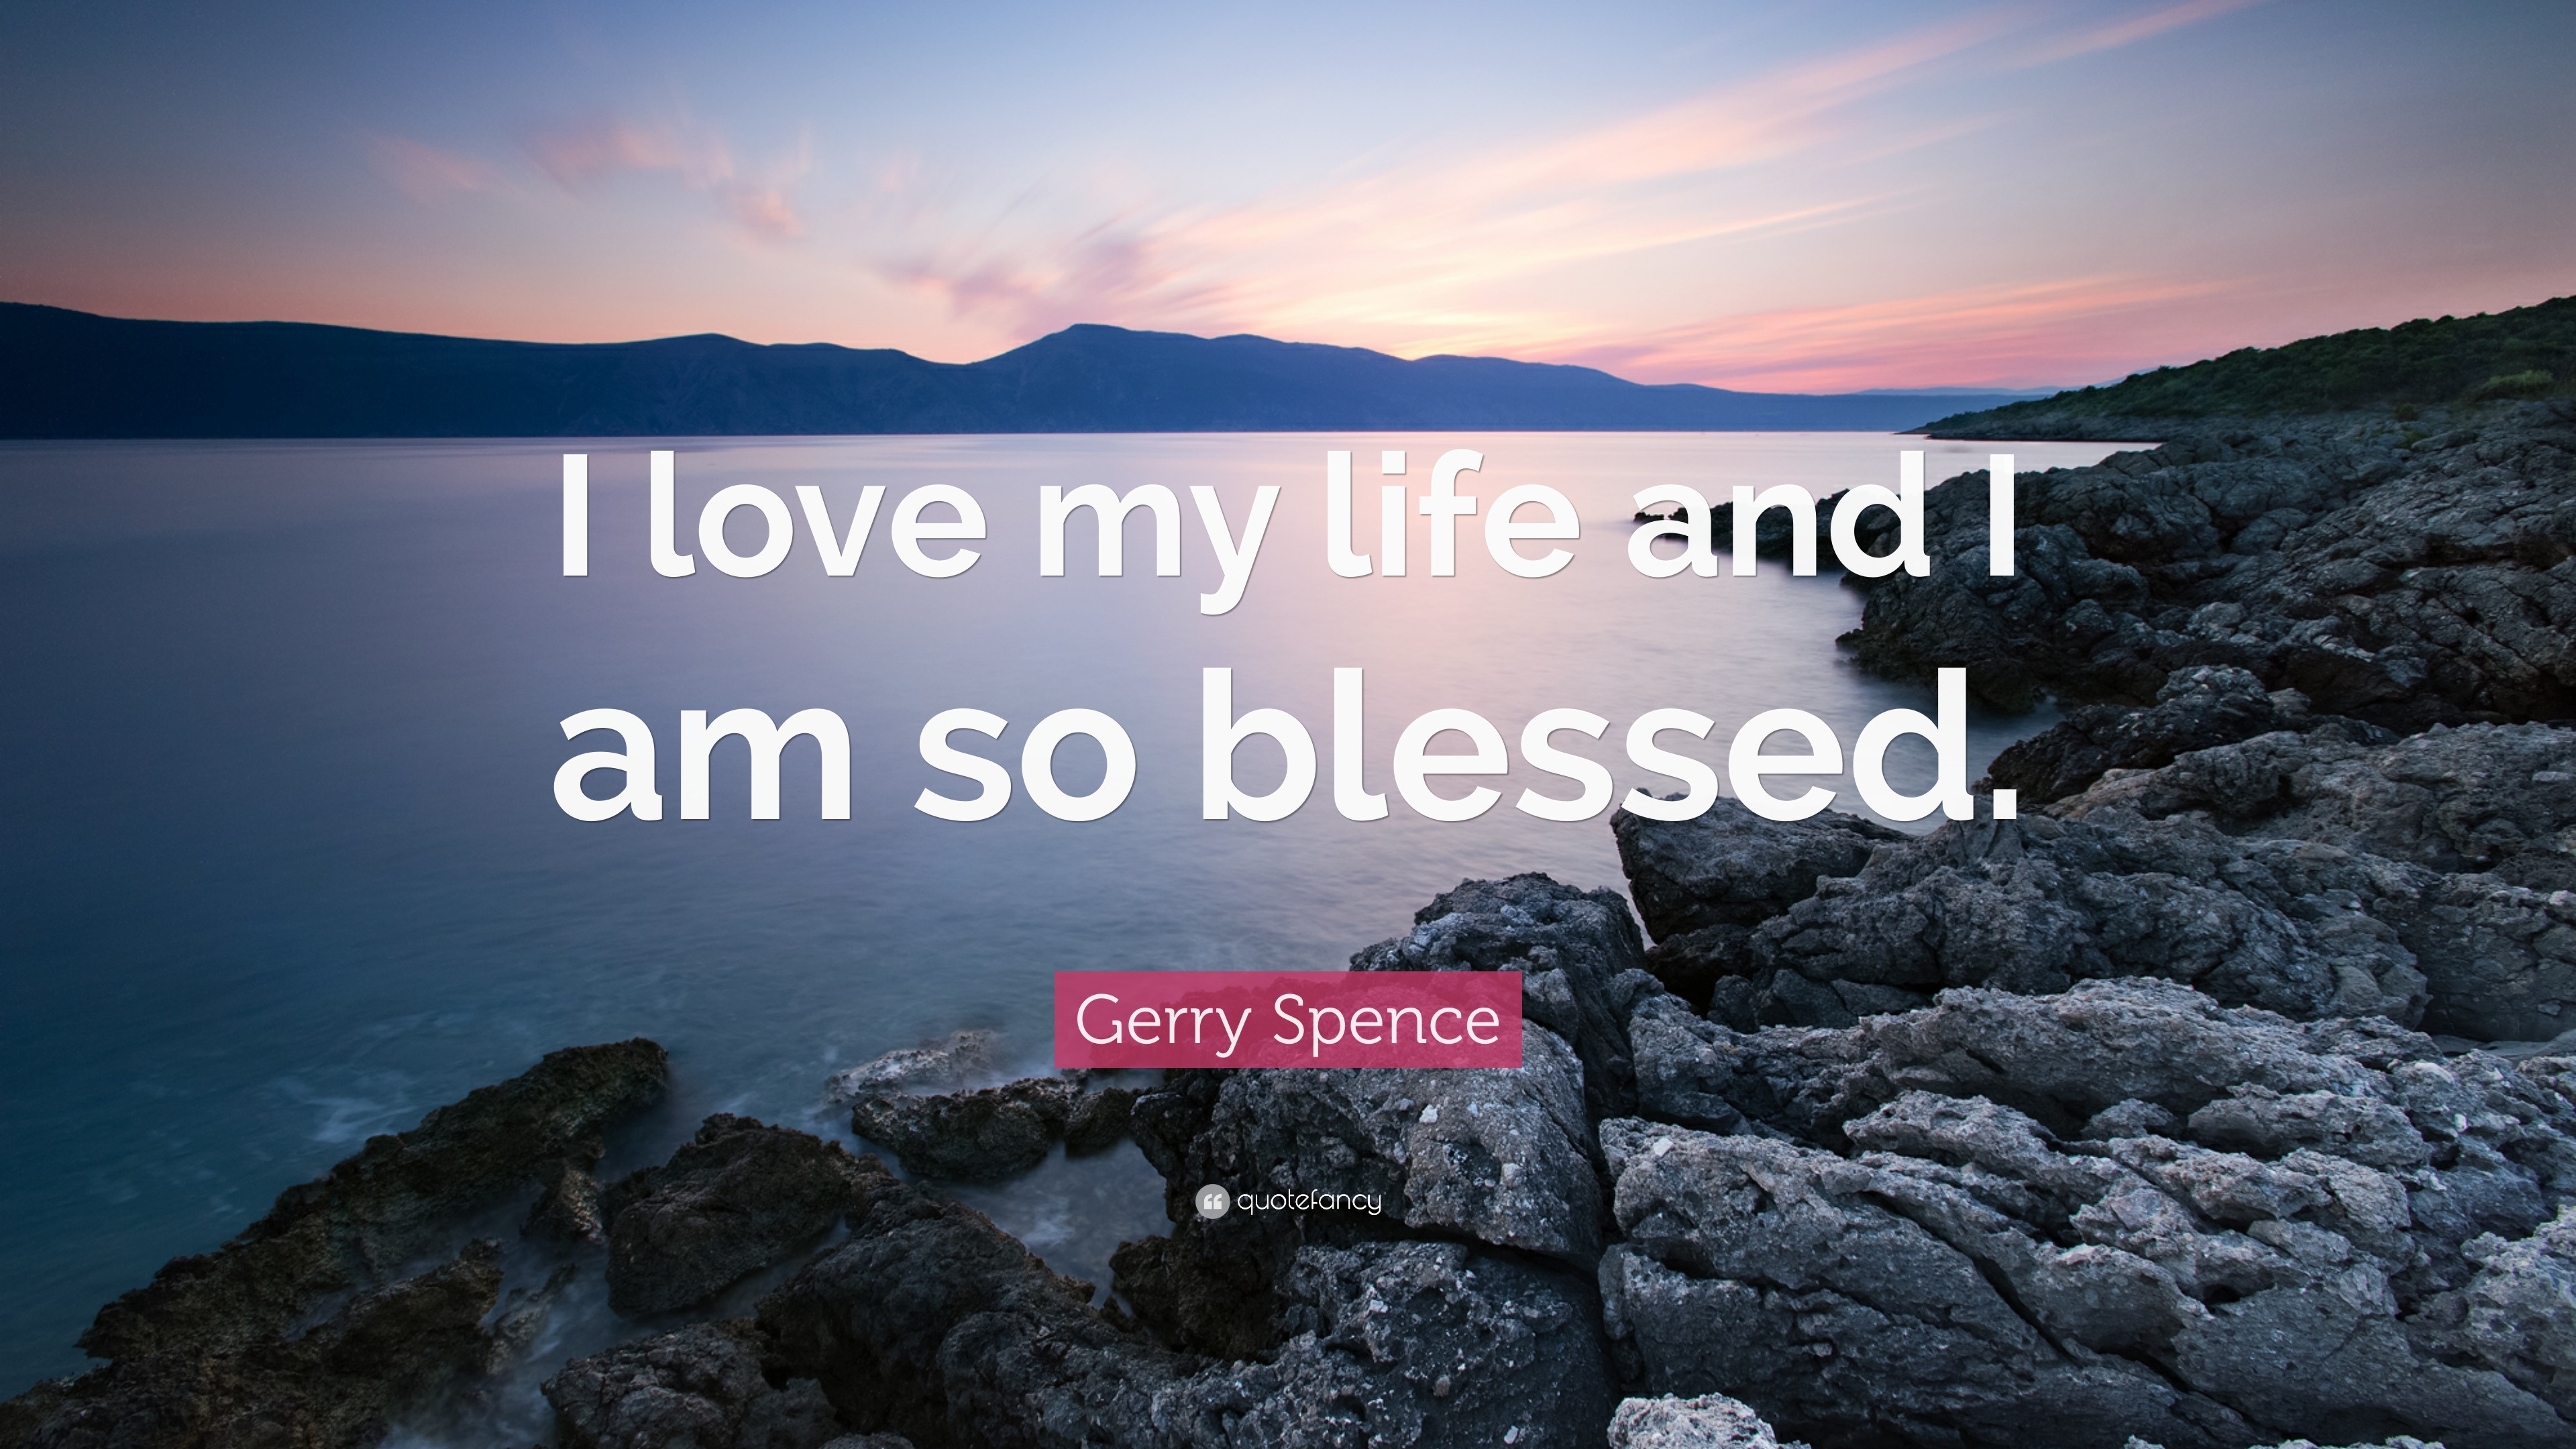 Gerry Spence Quote I Love My Life And I Am So Blessed